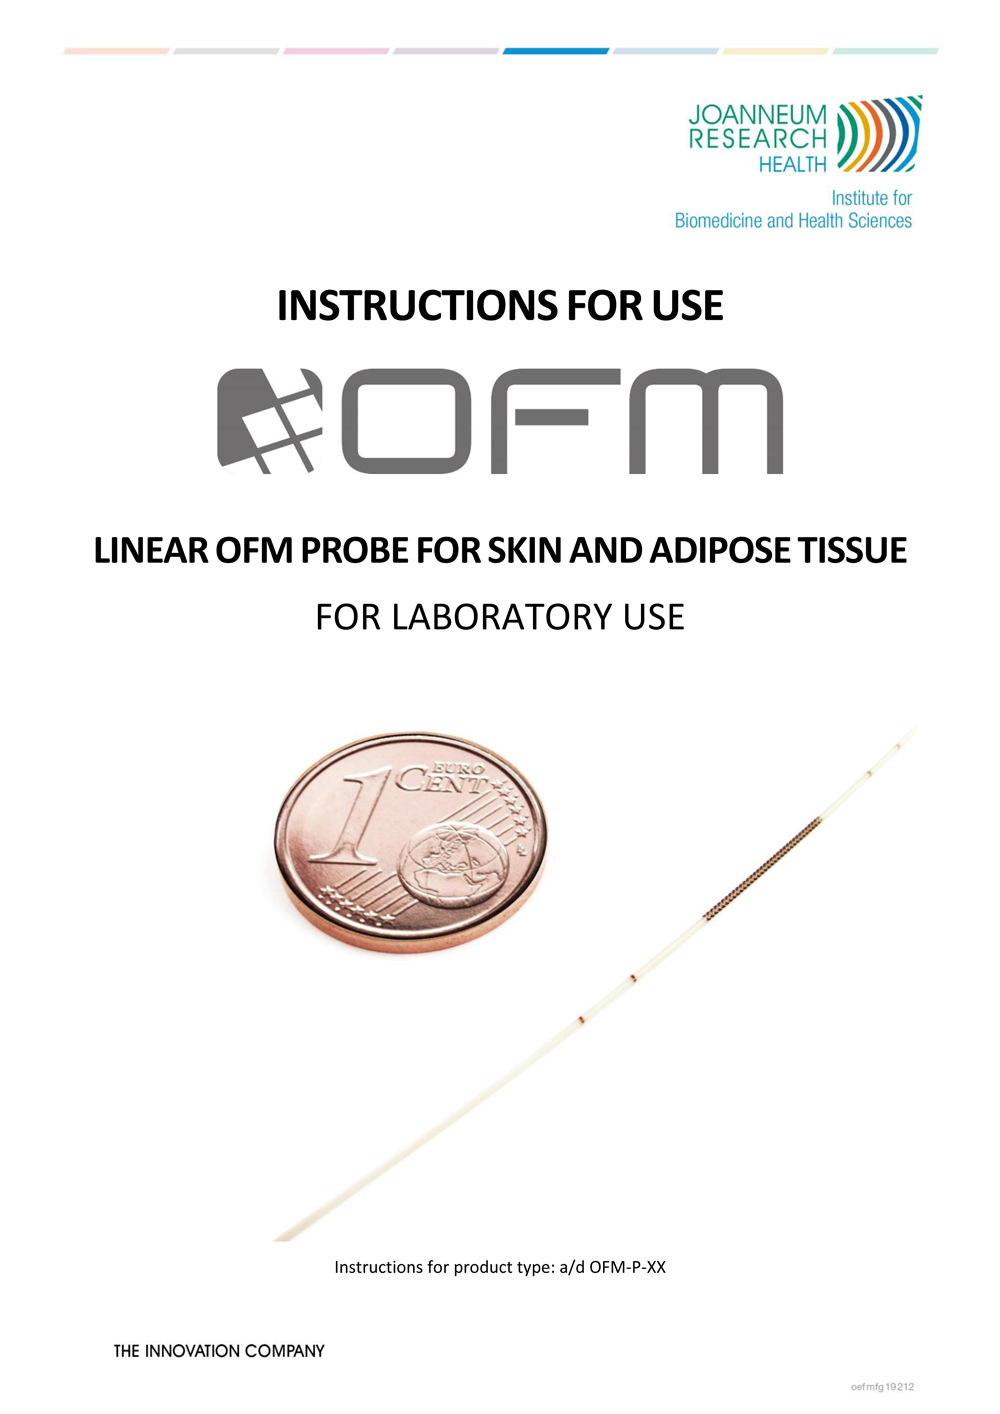 inear OFM Probe for Skin and Adipose Tissue